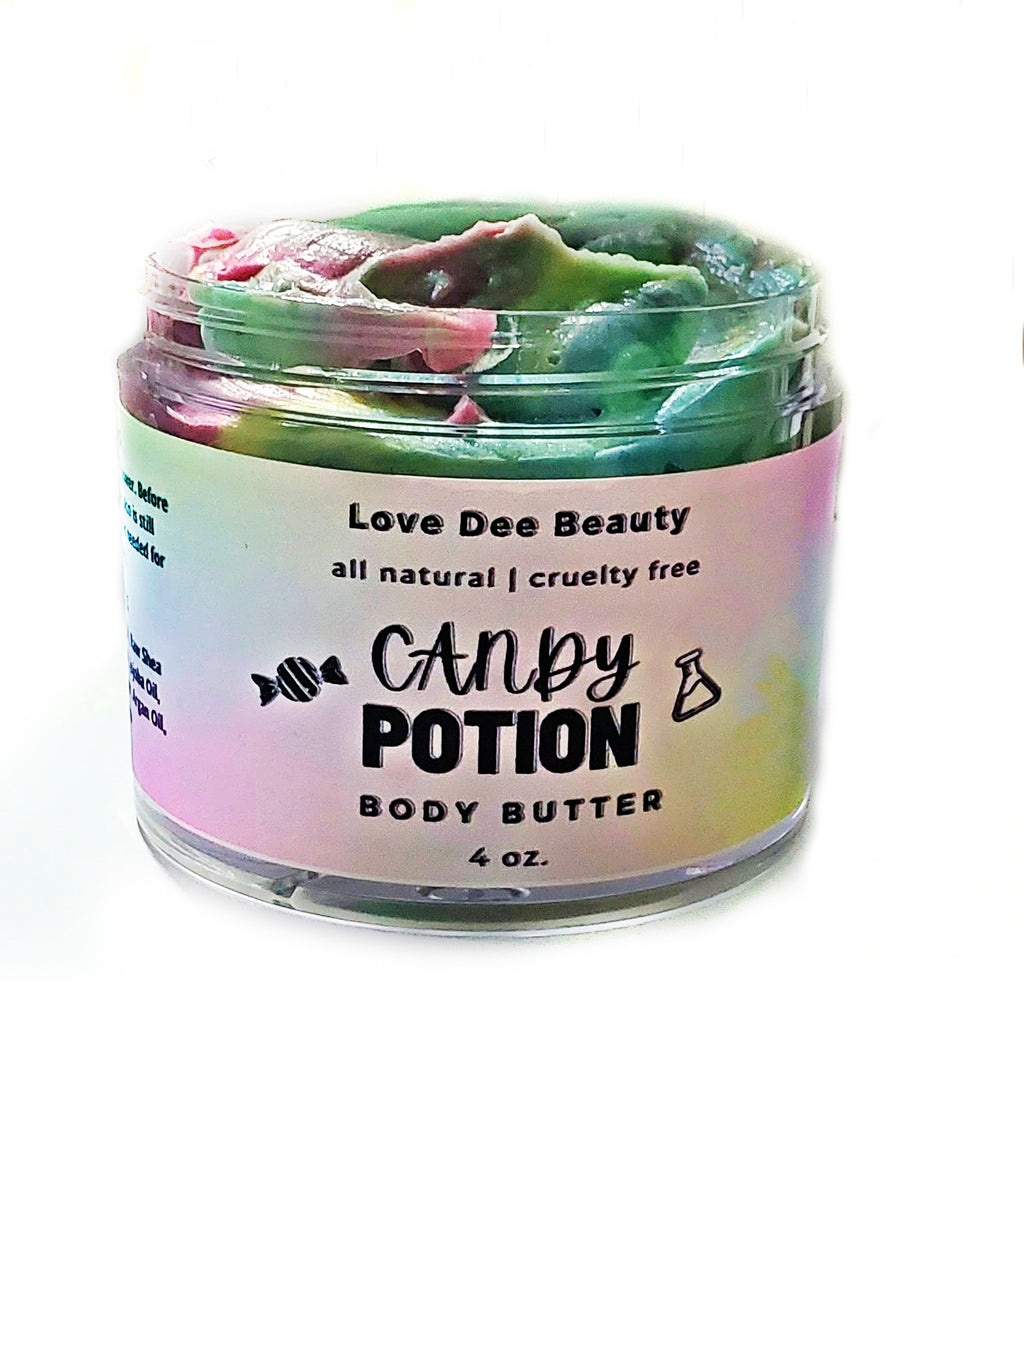 Candy Potion Body Butter